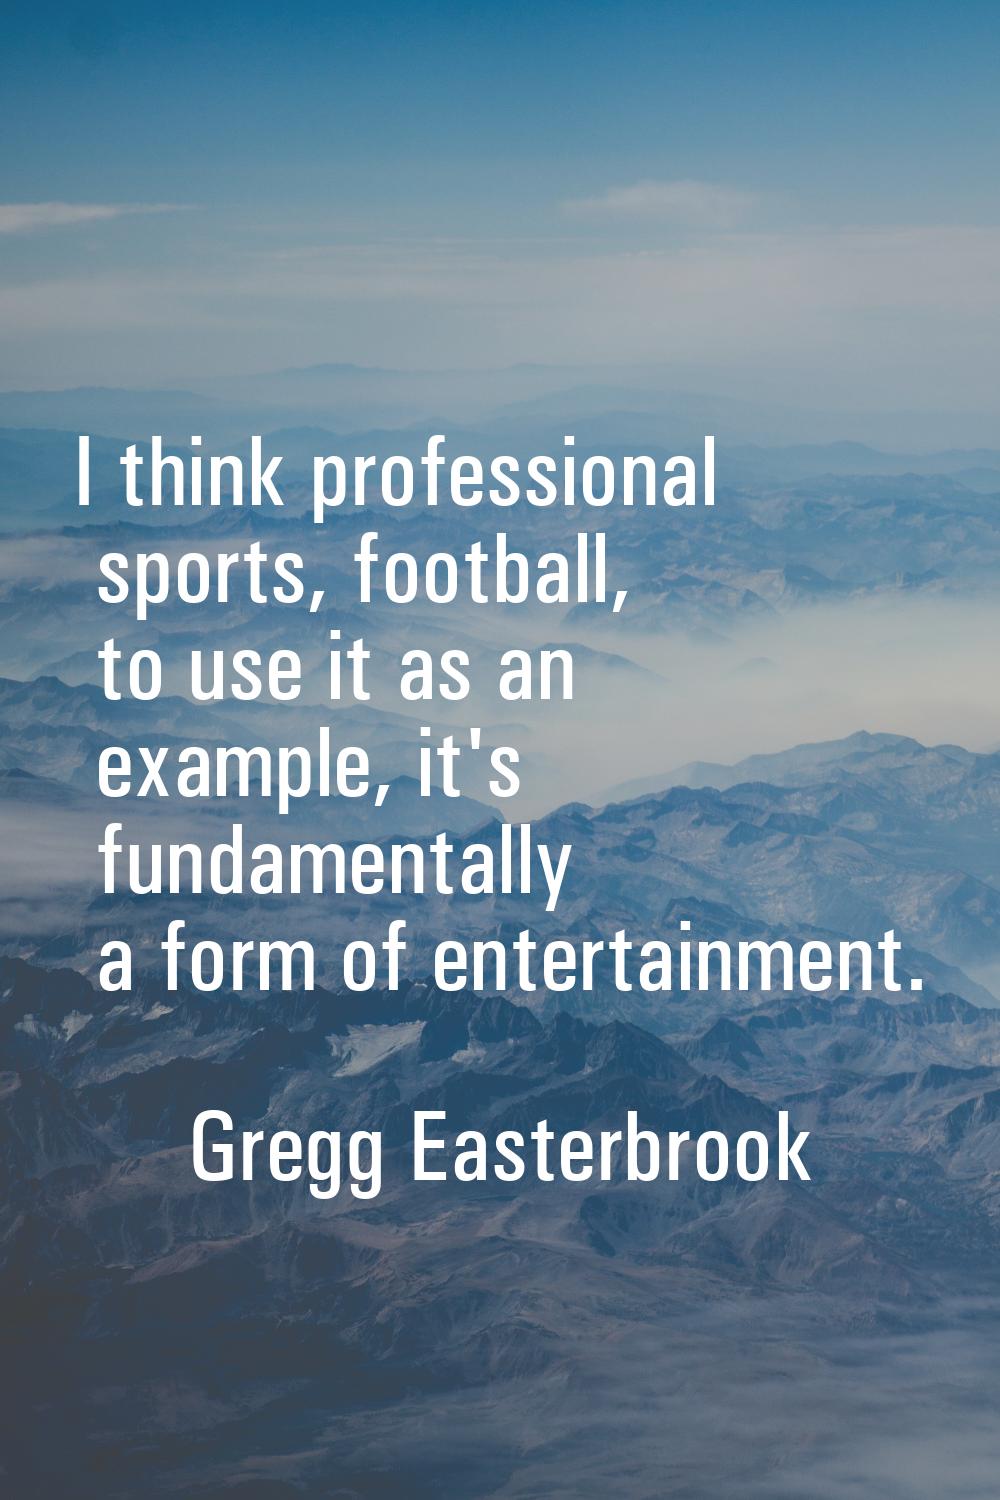 I think professional sports, football, to use it as an example, it's fundamentally a form of entert